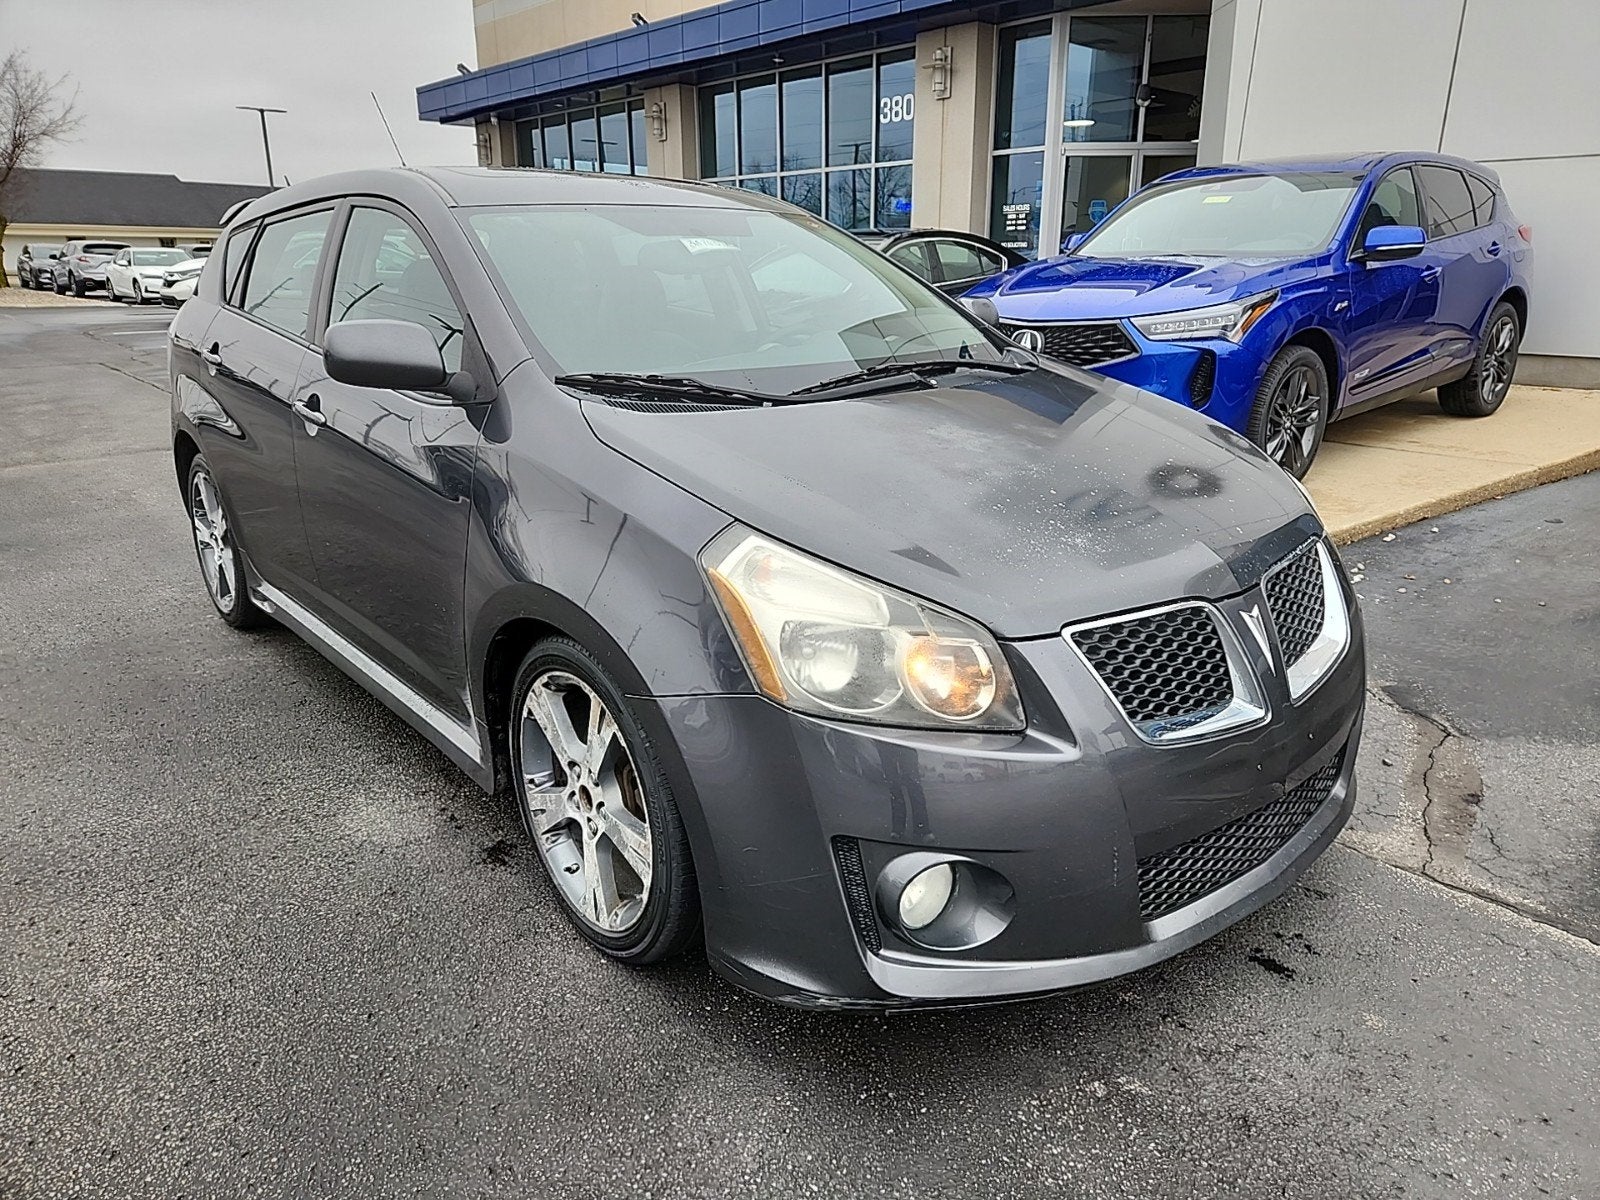 Used 2009 Pontiac Vibe GT with VIN 5Y2SR67009Z406778 for sale in Indianapolis, IN